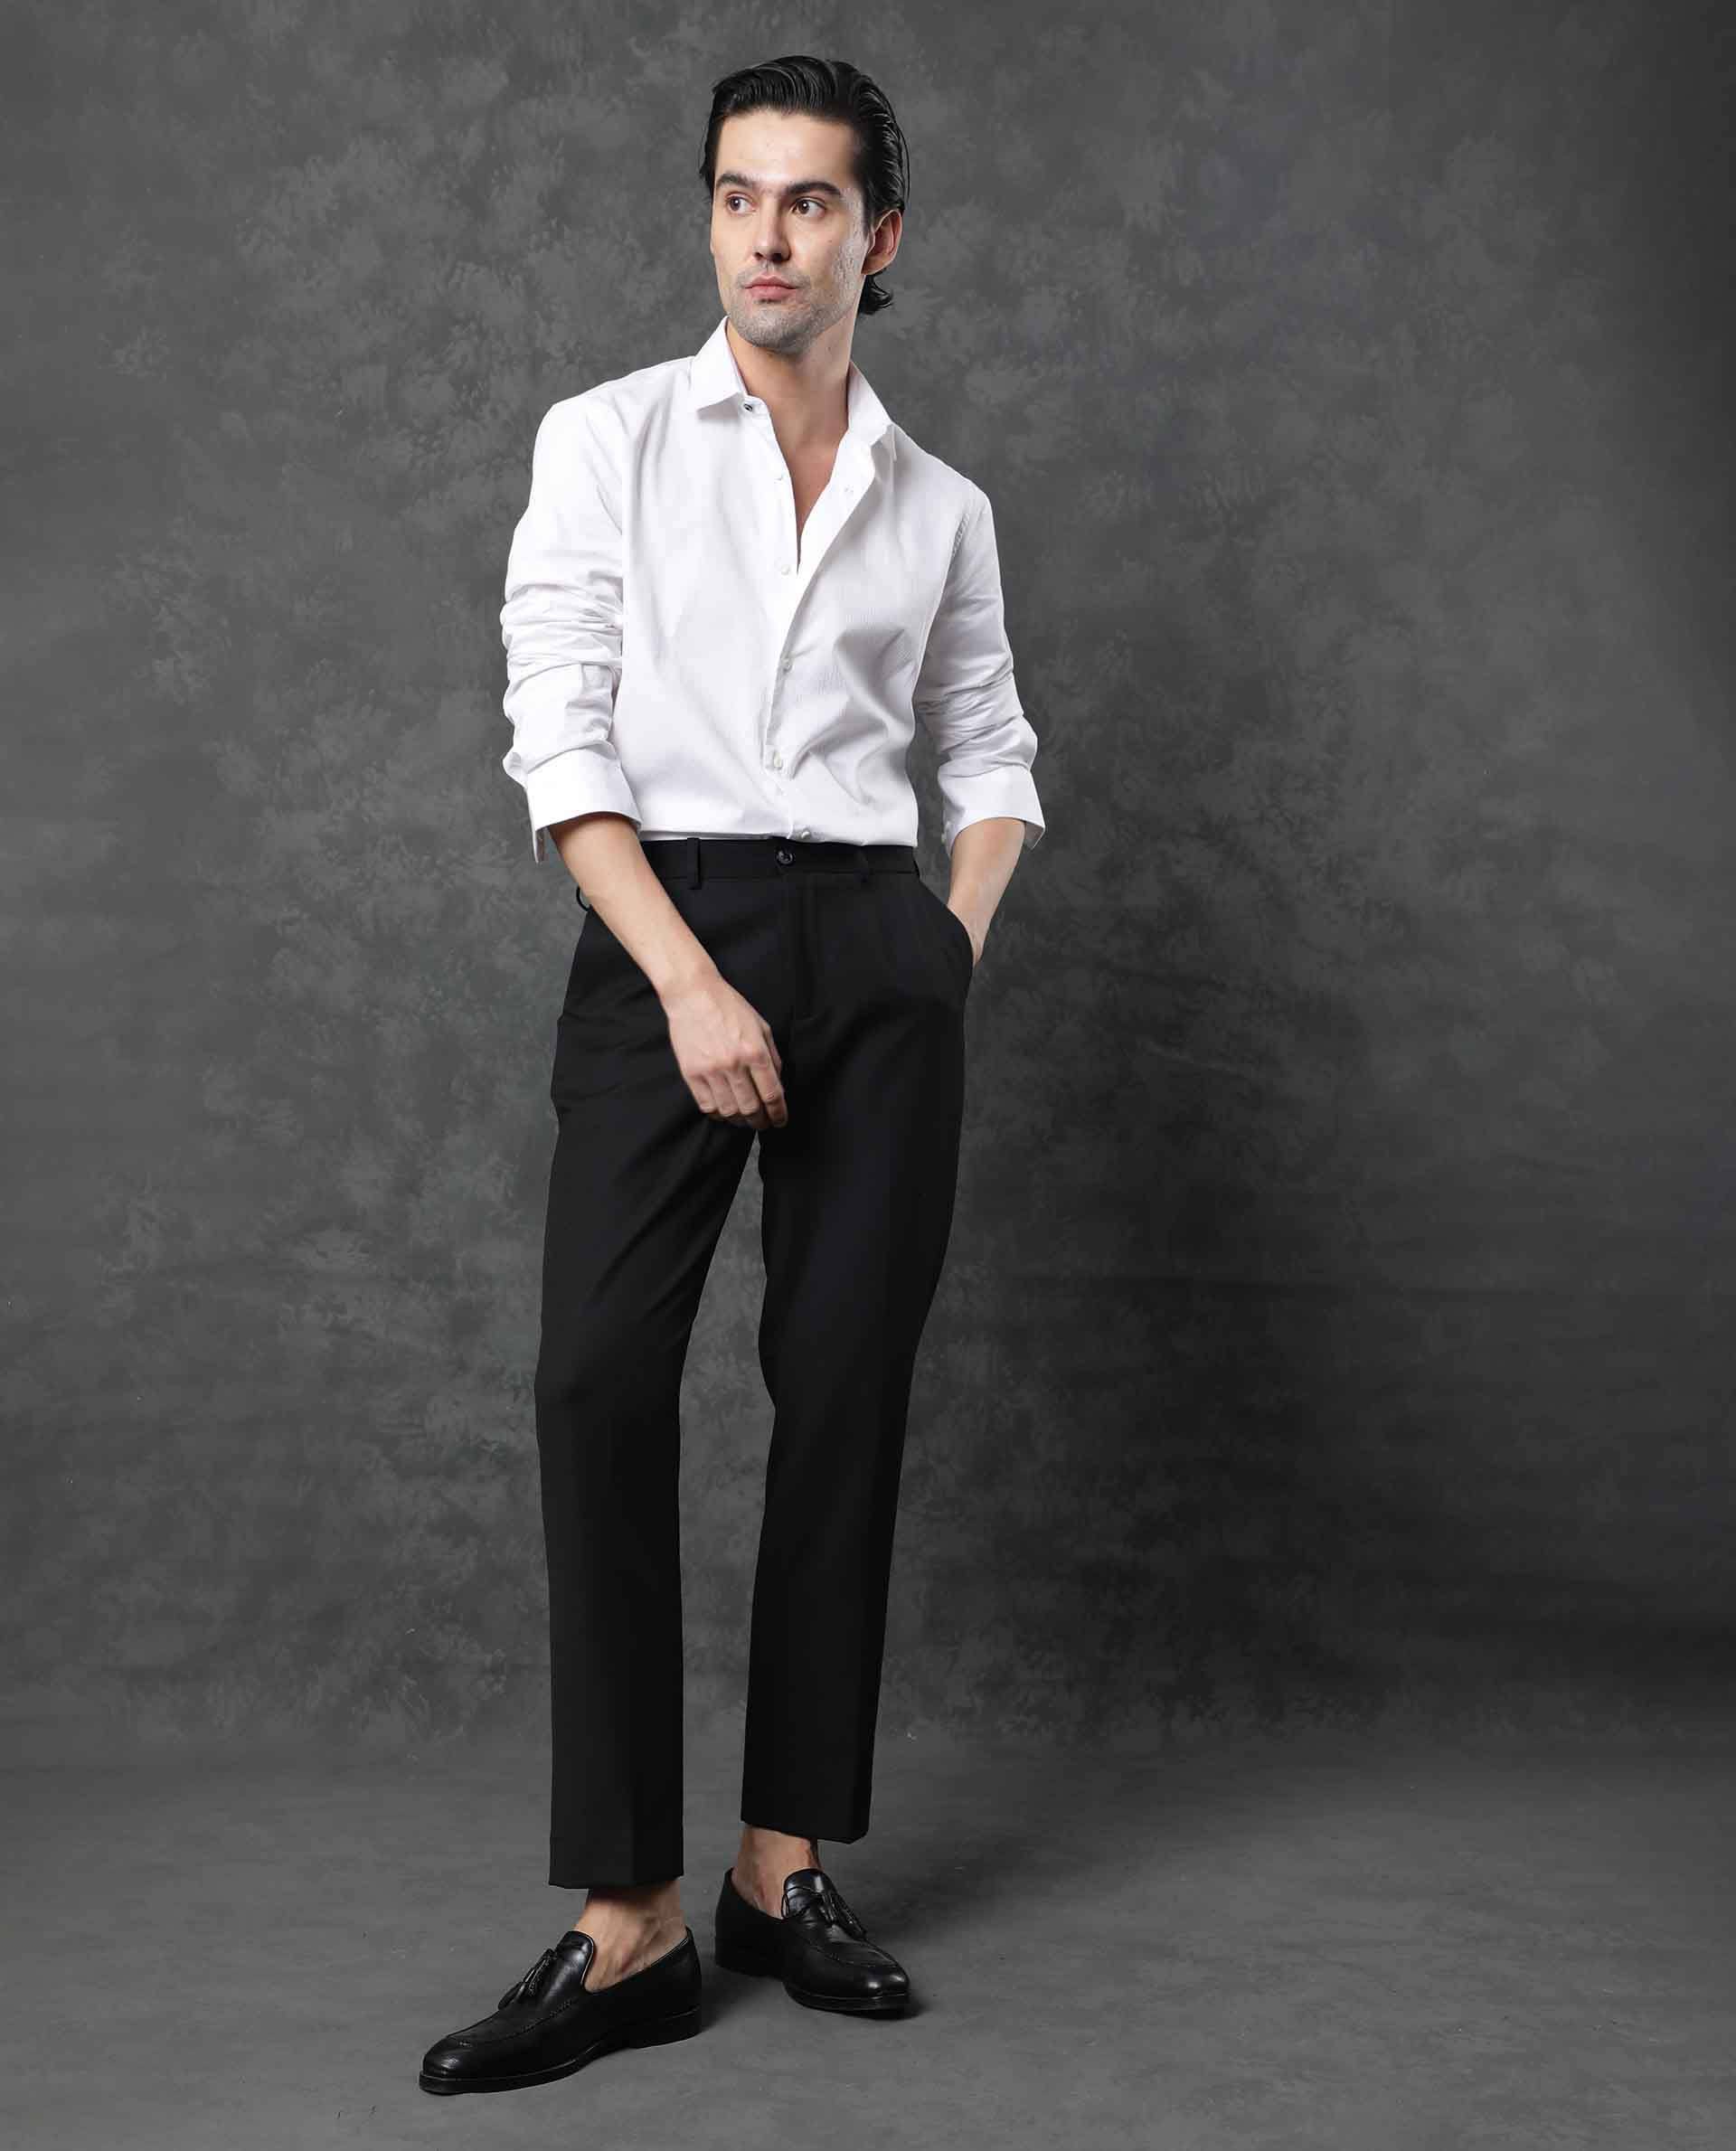 What type of shoes can I wear with black pants and a white shirt? - Quora